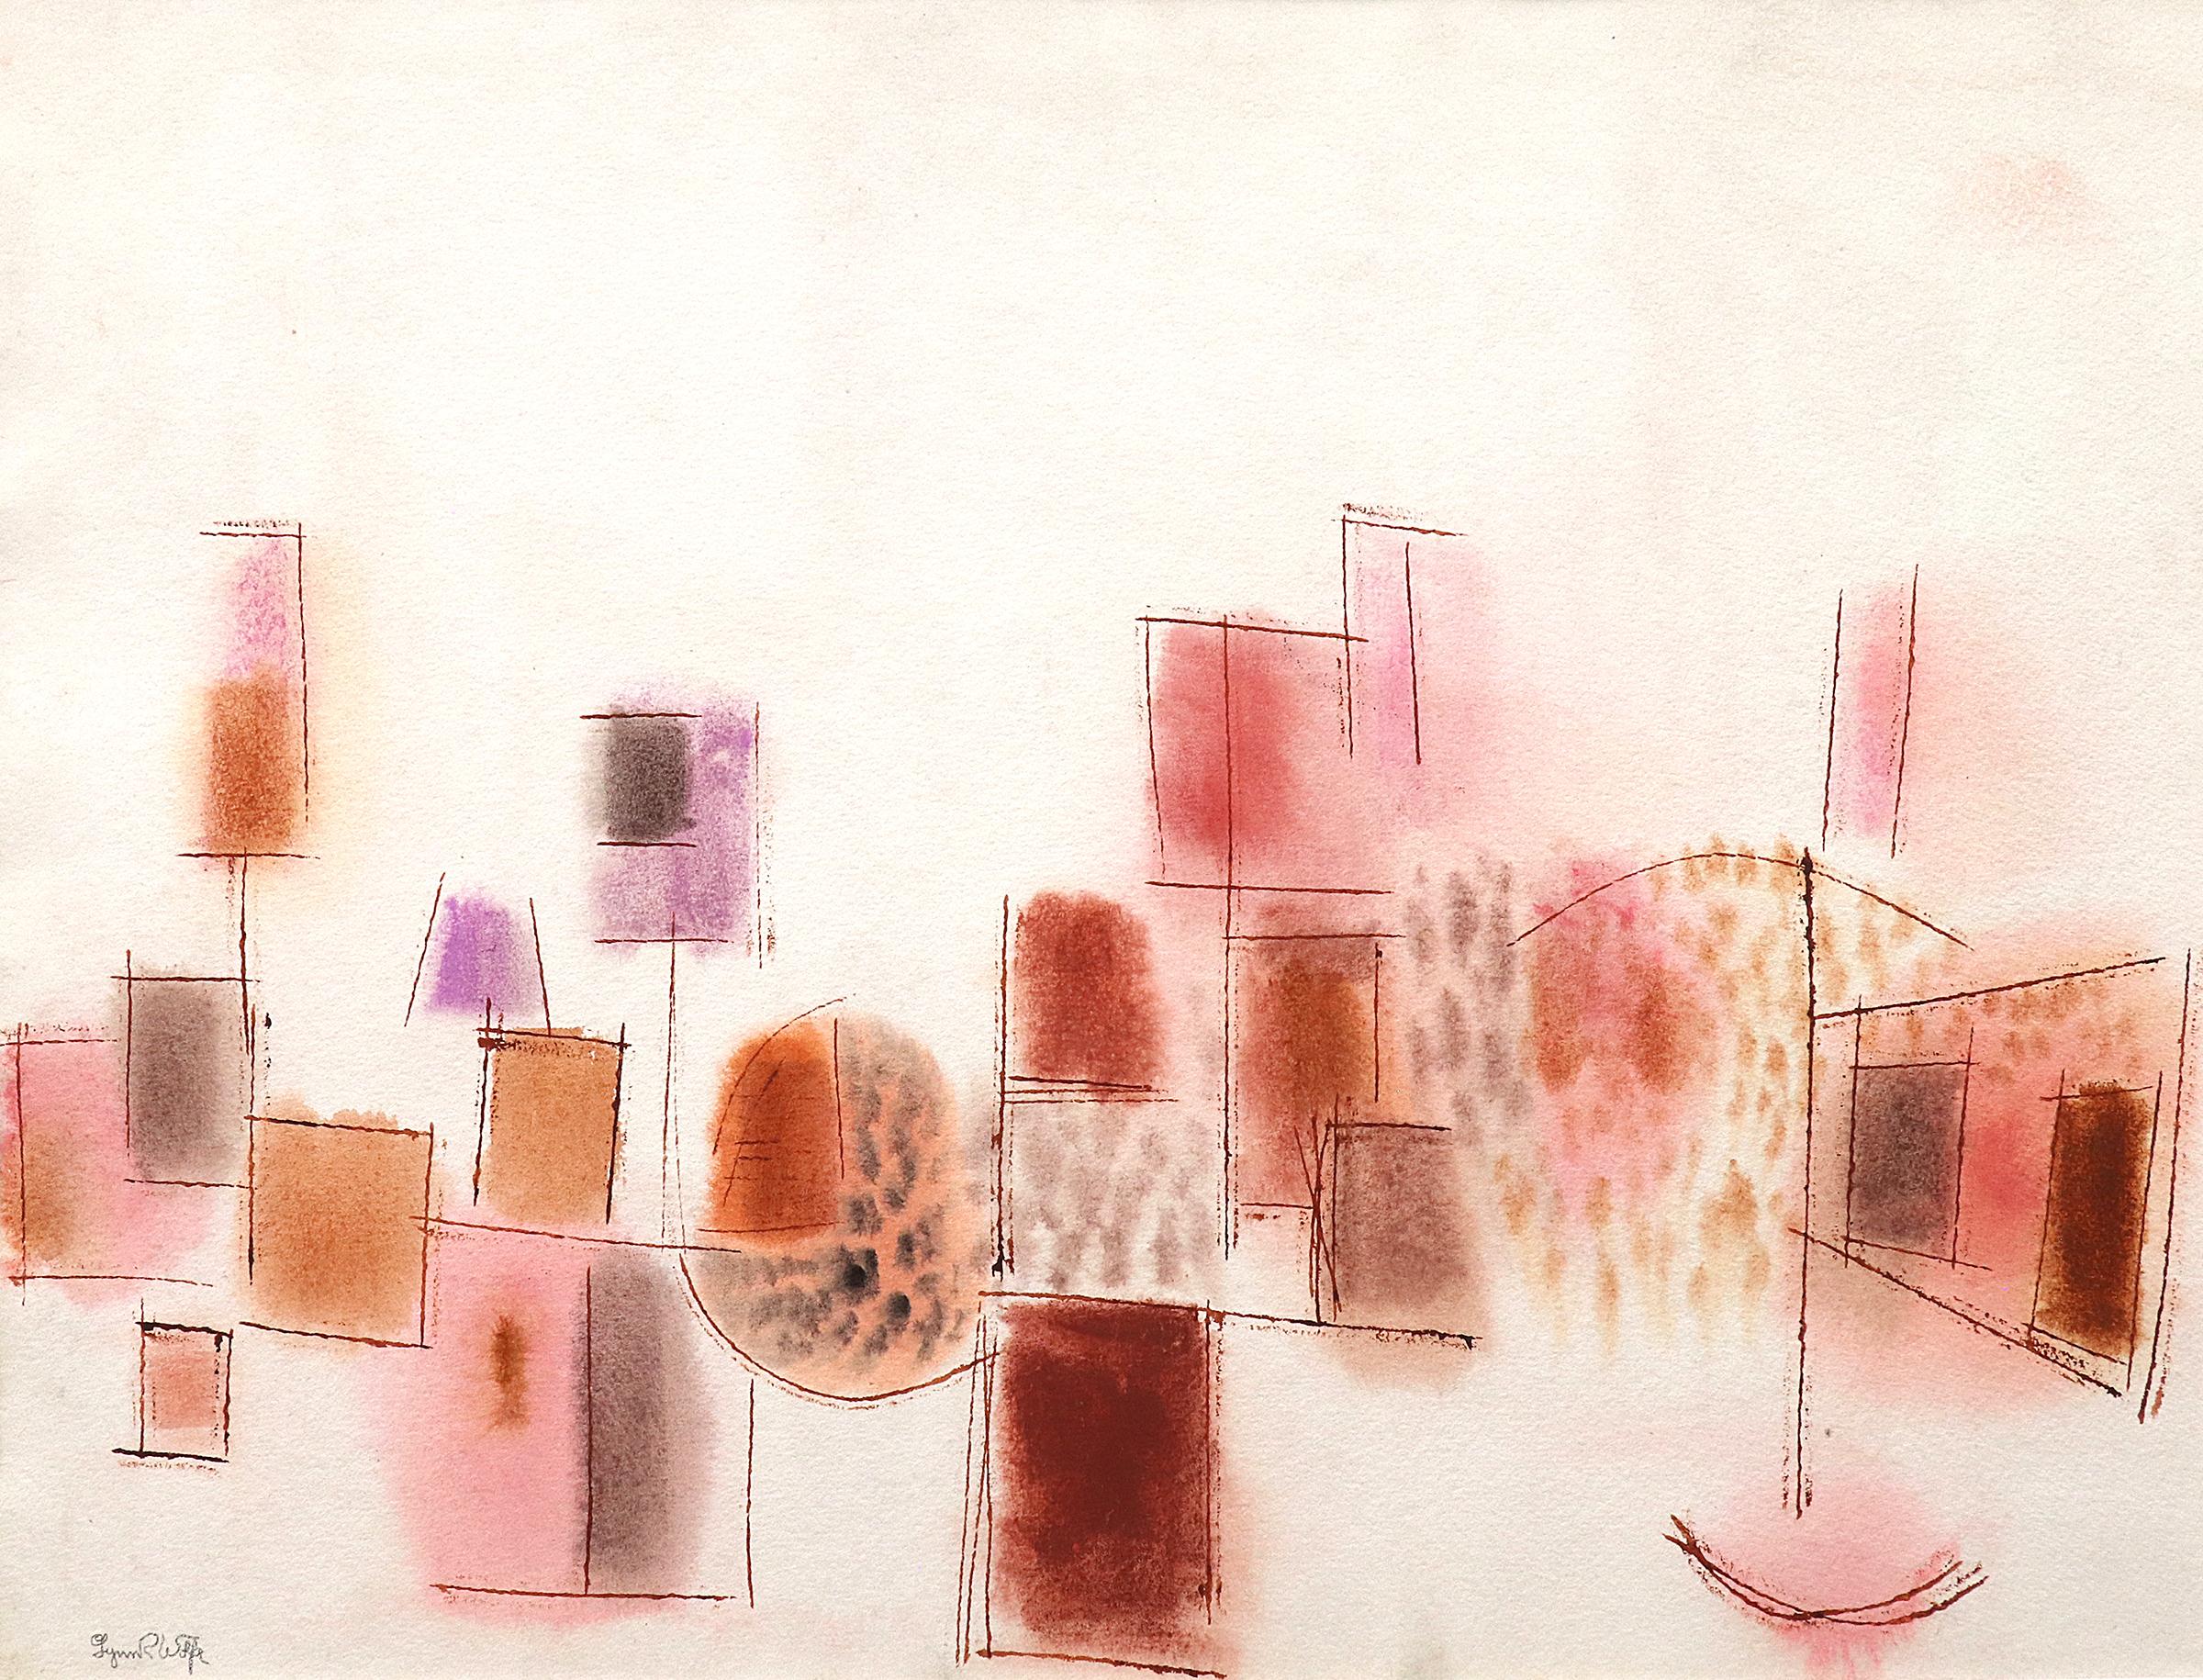 Pink, orange, and red abstract watercolor on paper by Lynn R. Wolfe (1917-2019). Signed by the artist in the lower left corner. Presented in a custom frame with all archival materials measuring 27 ½ x 34 ¼; image size is 22 ¼ x 30 inches.